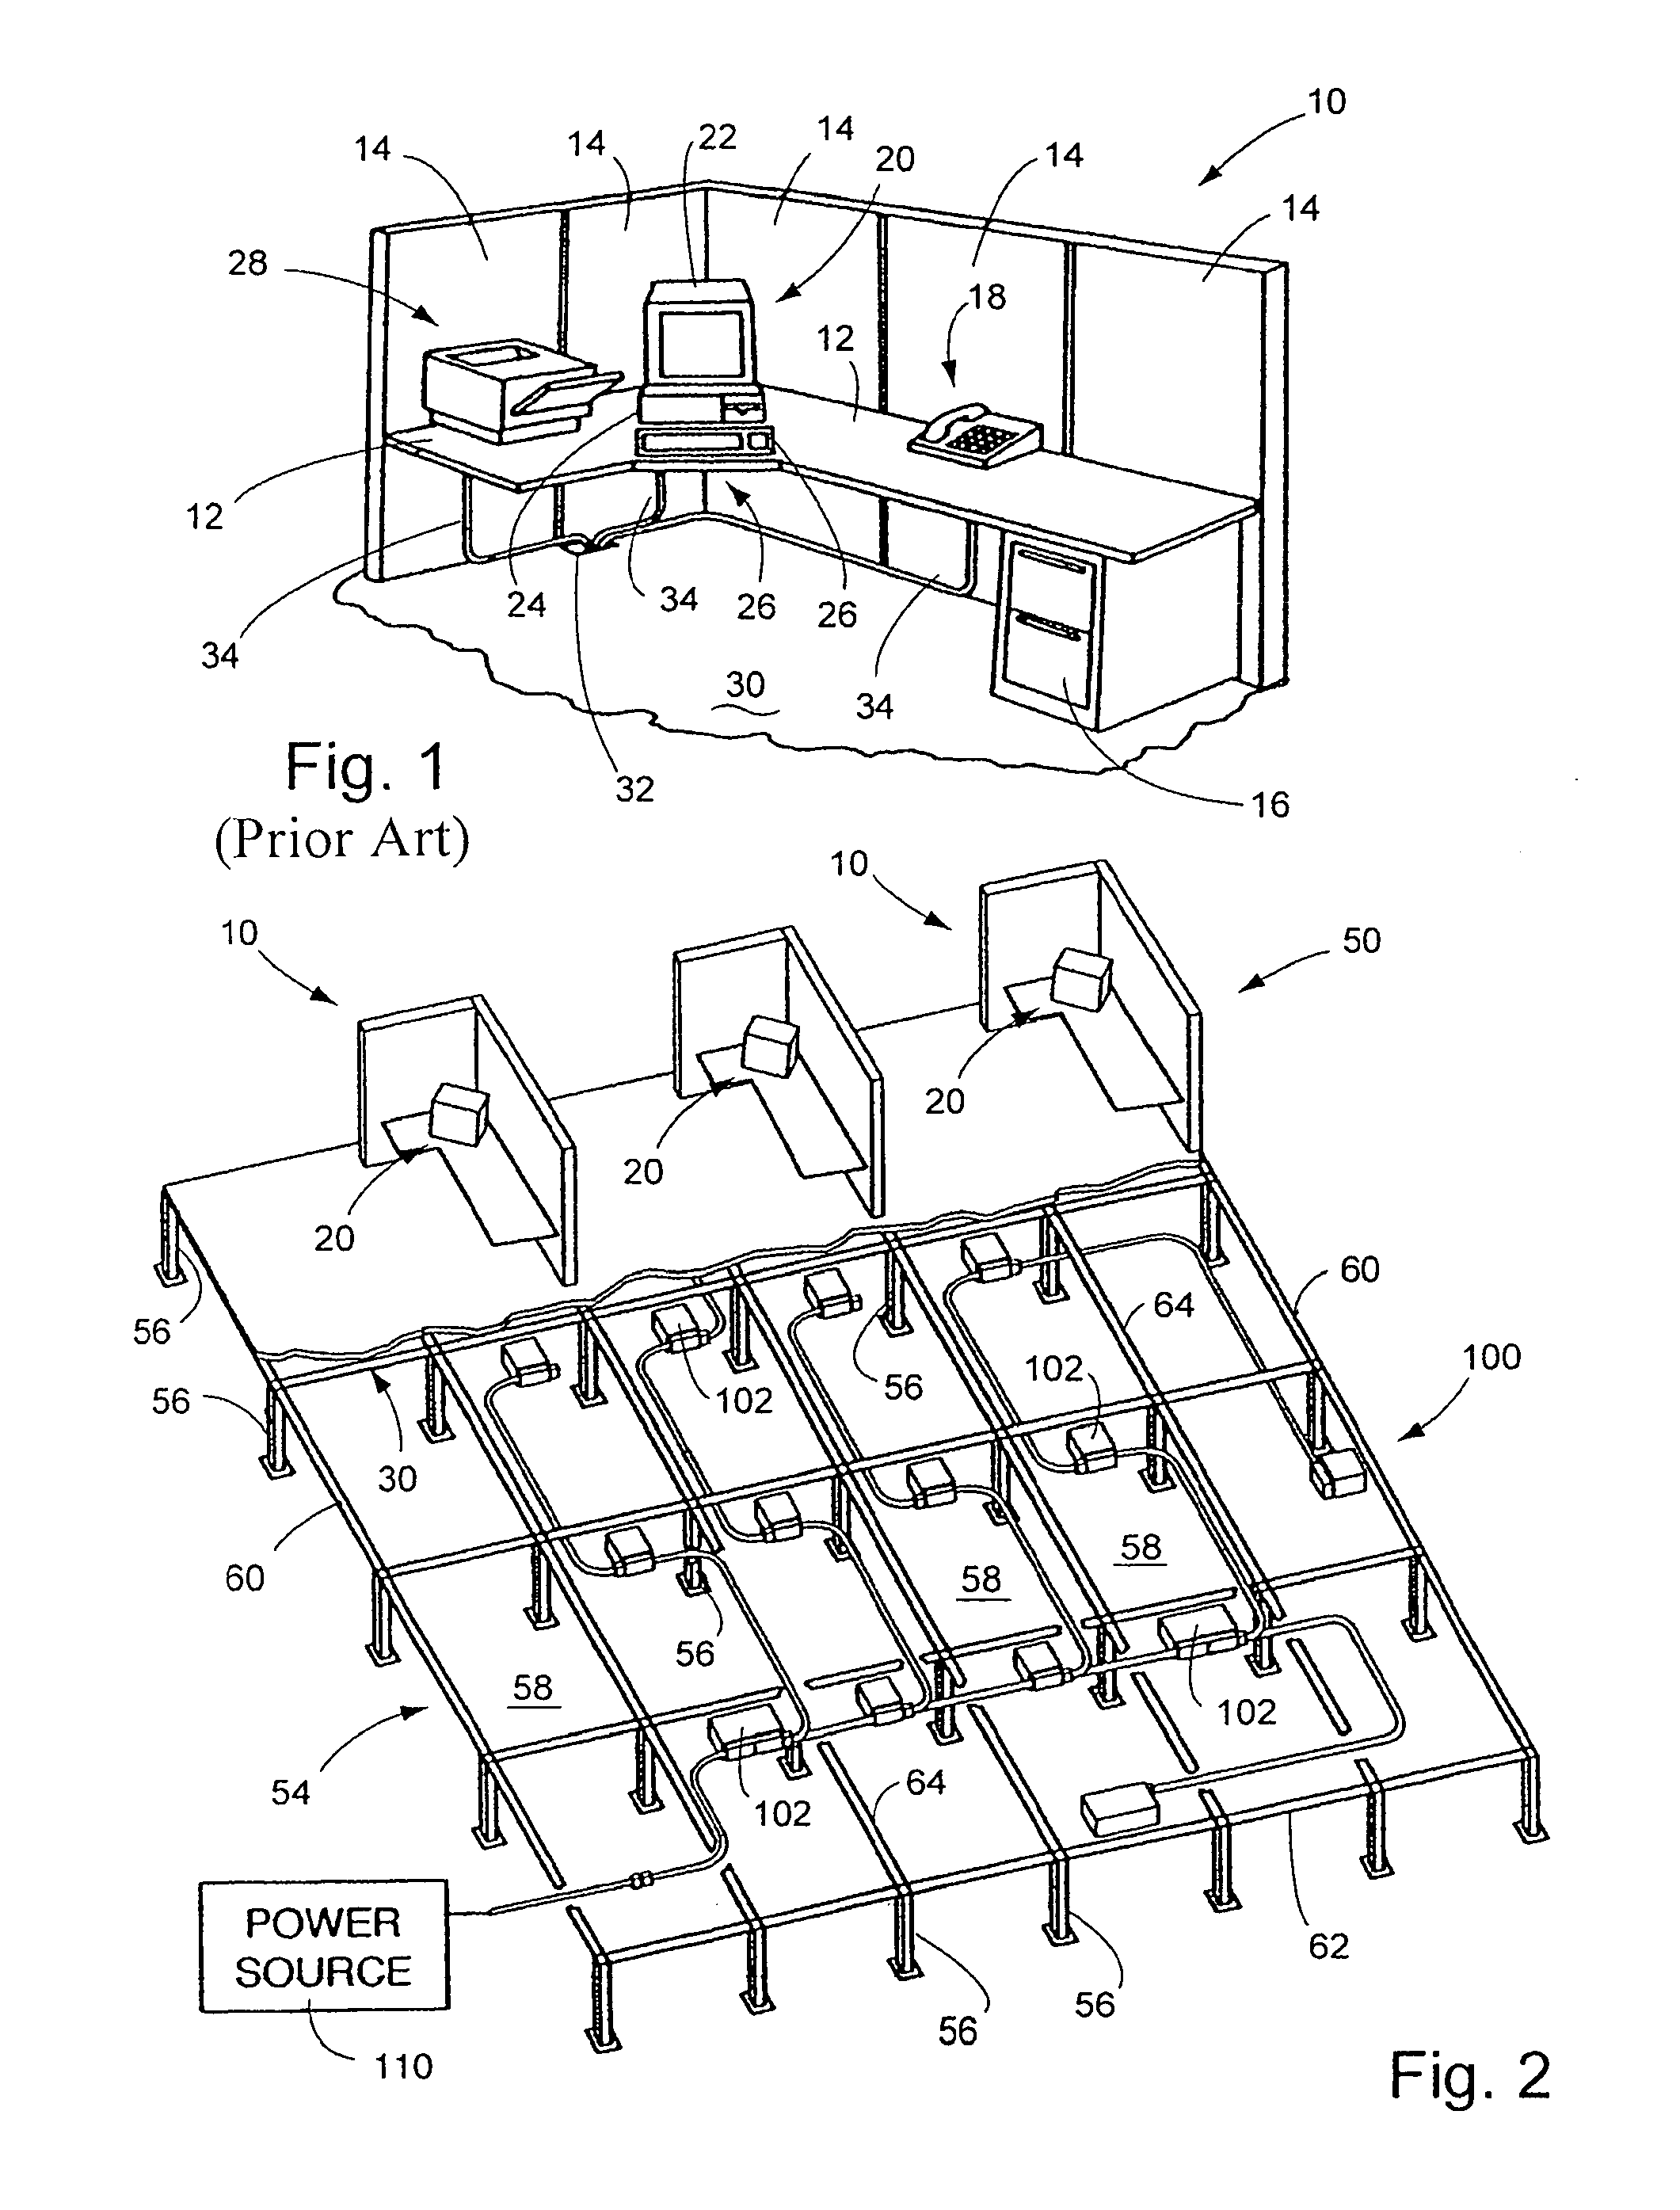 Electrical floor access module system